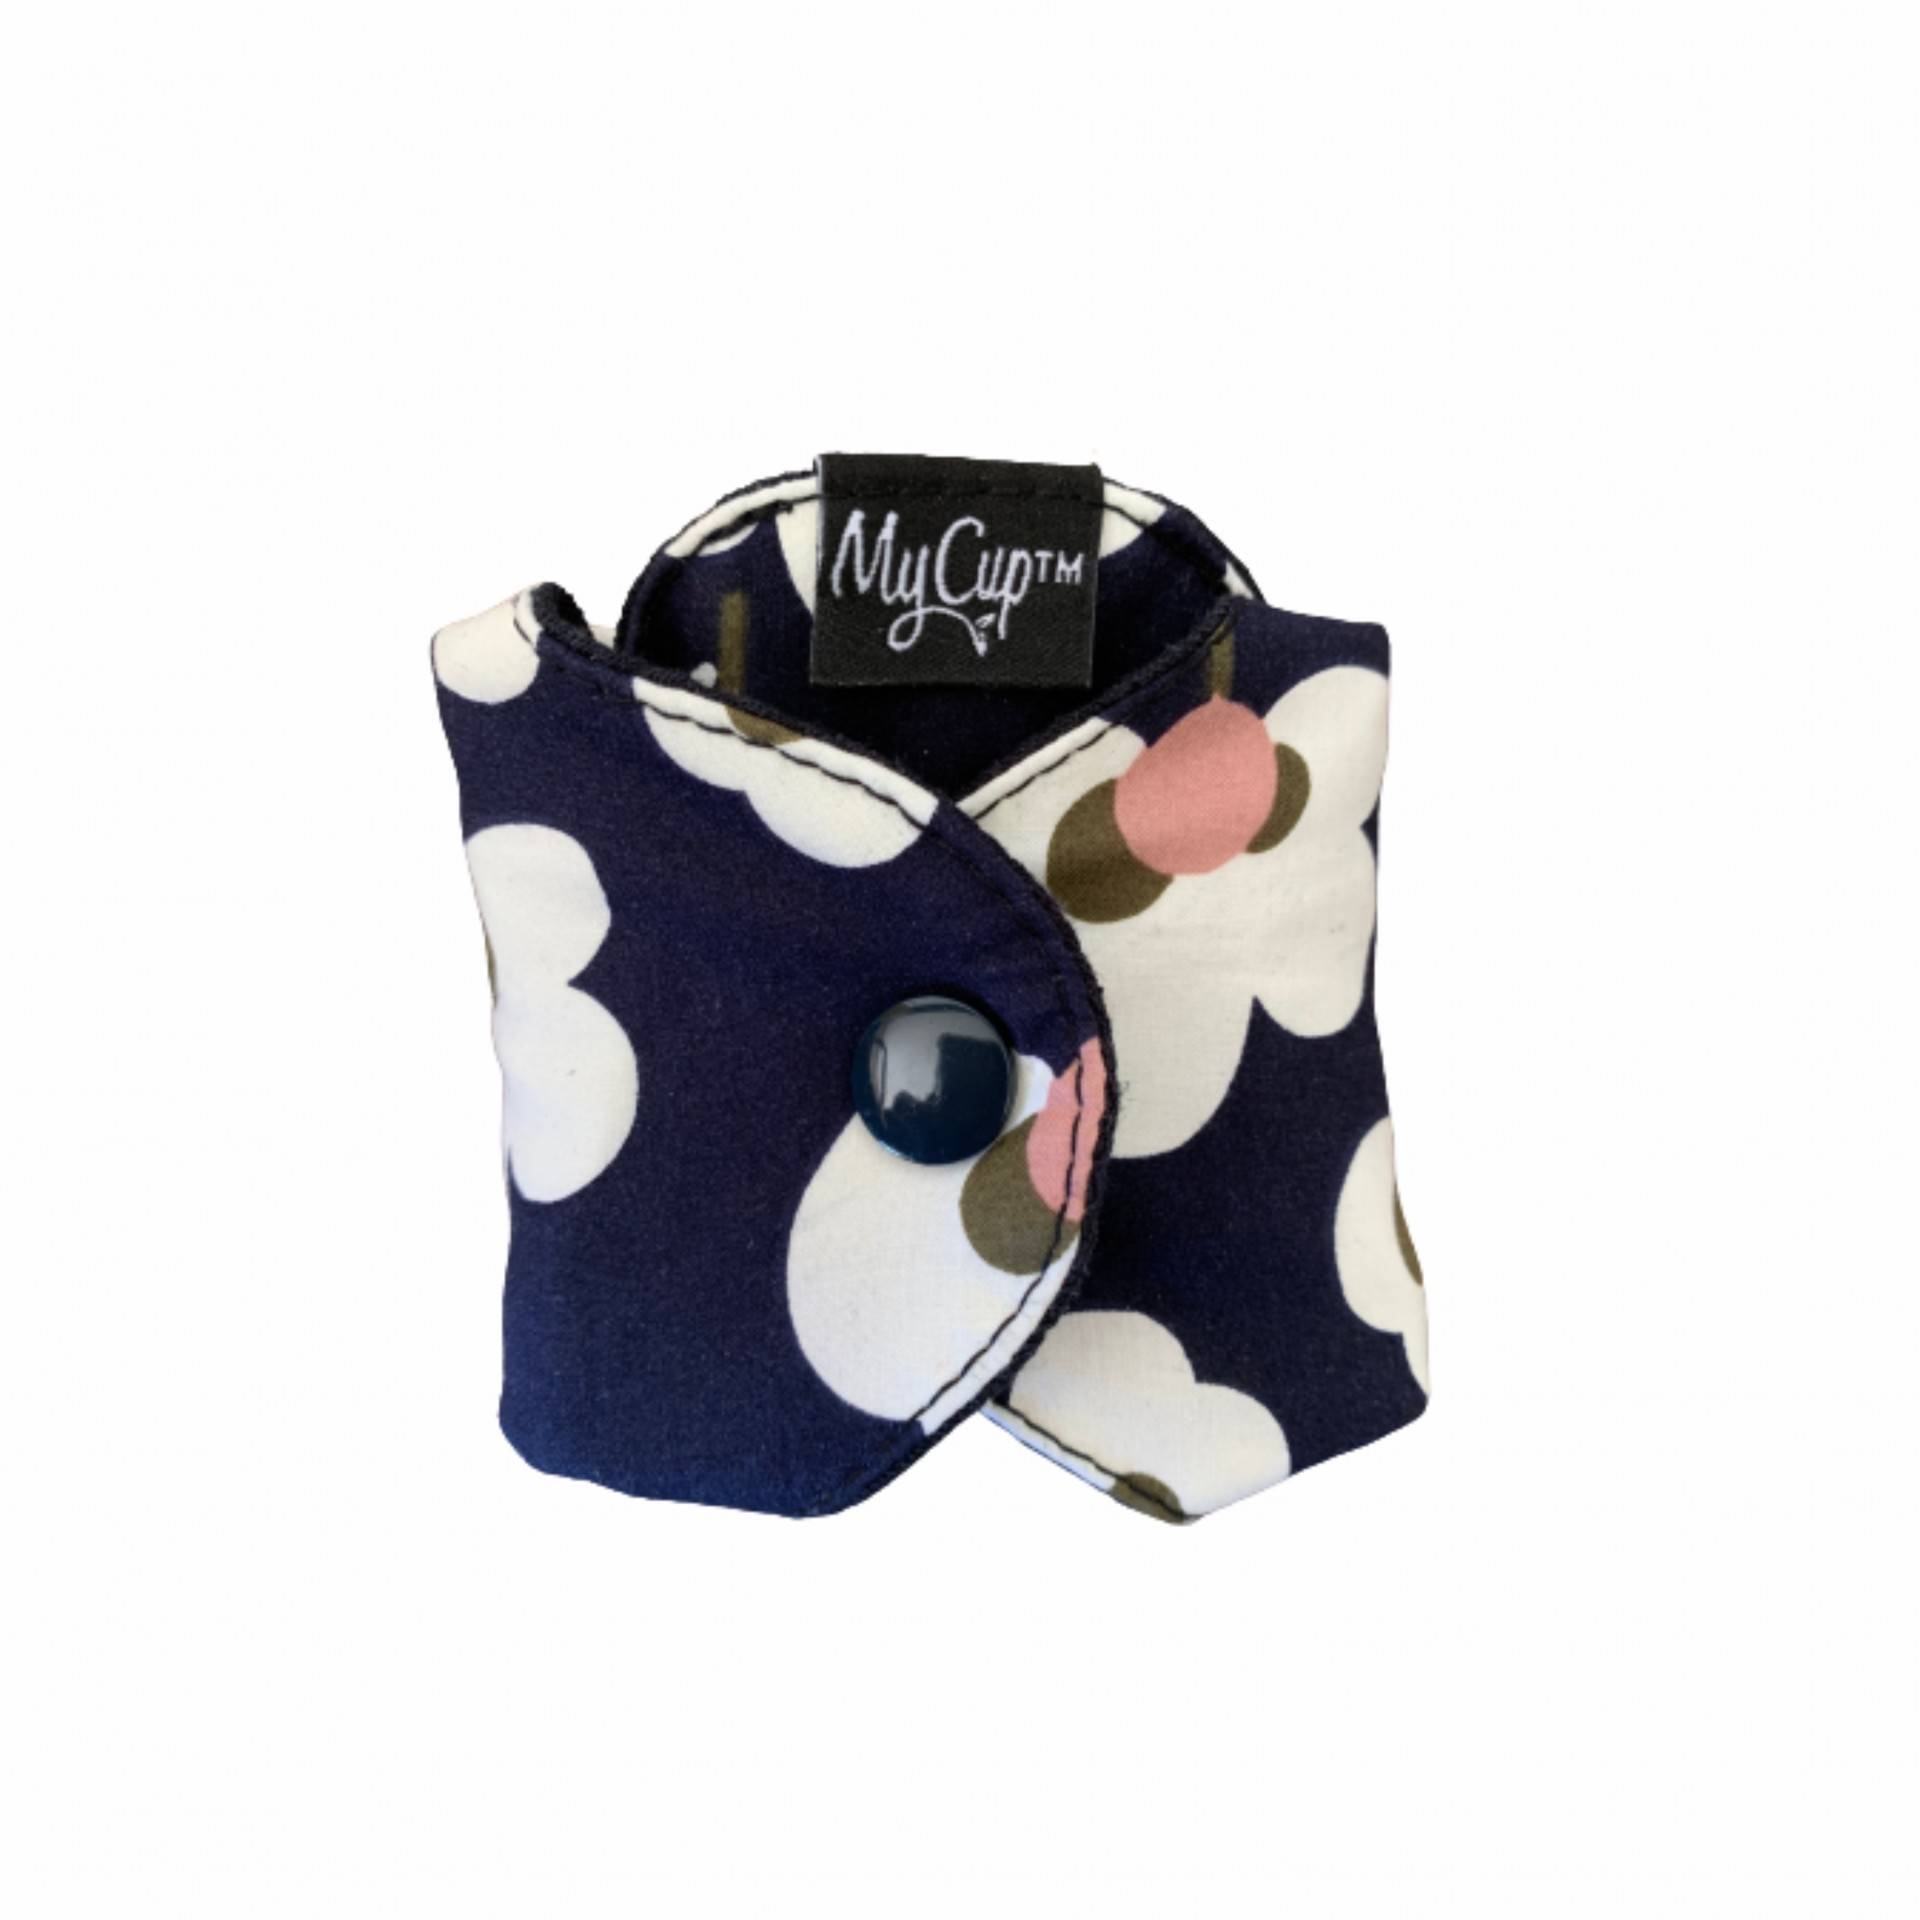 MyCup Reusable Panty Liner